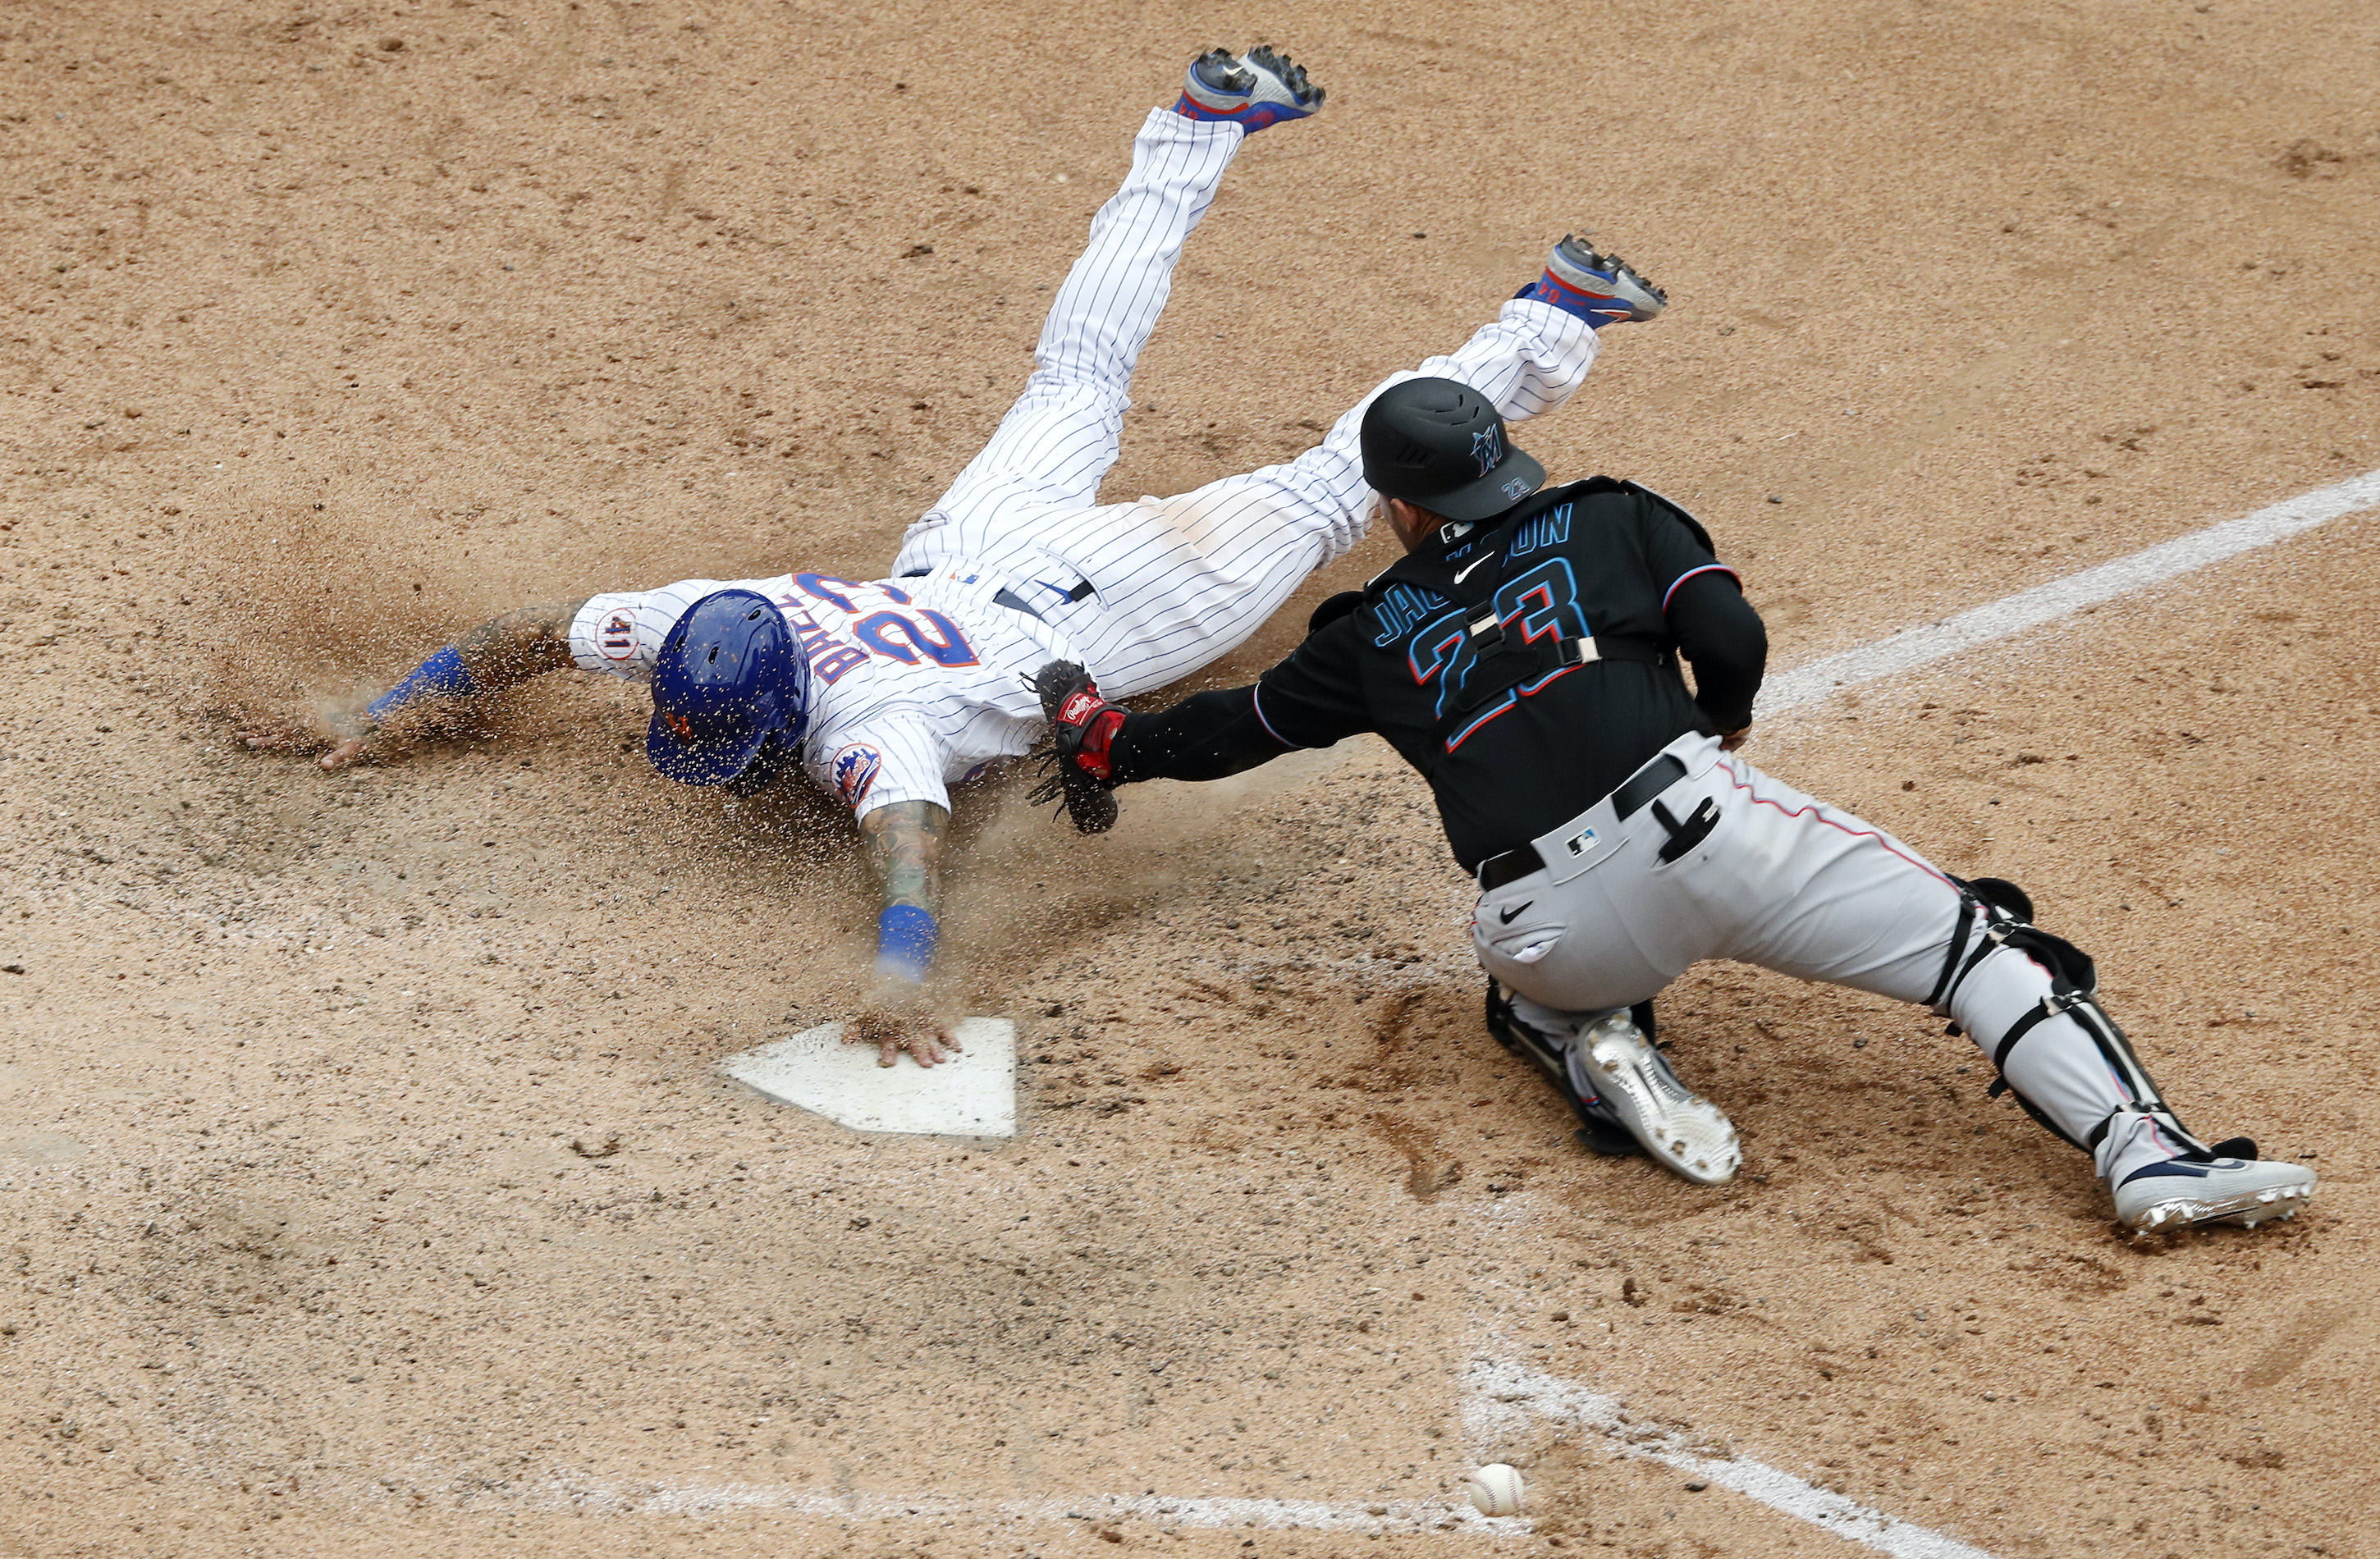 Javier Baez #23 of the New York Mets slides home with the game winning run in the ninth inning against Alex Jackson #23 of the Miami Marlins at Citi Field on August 31, 2021 in New York City.